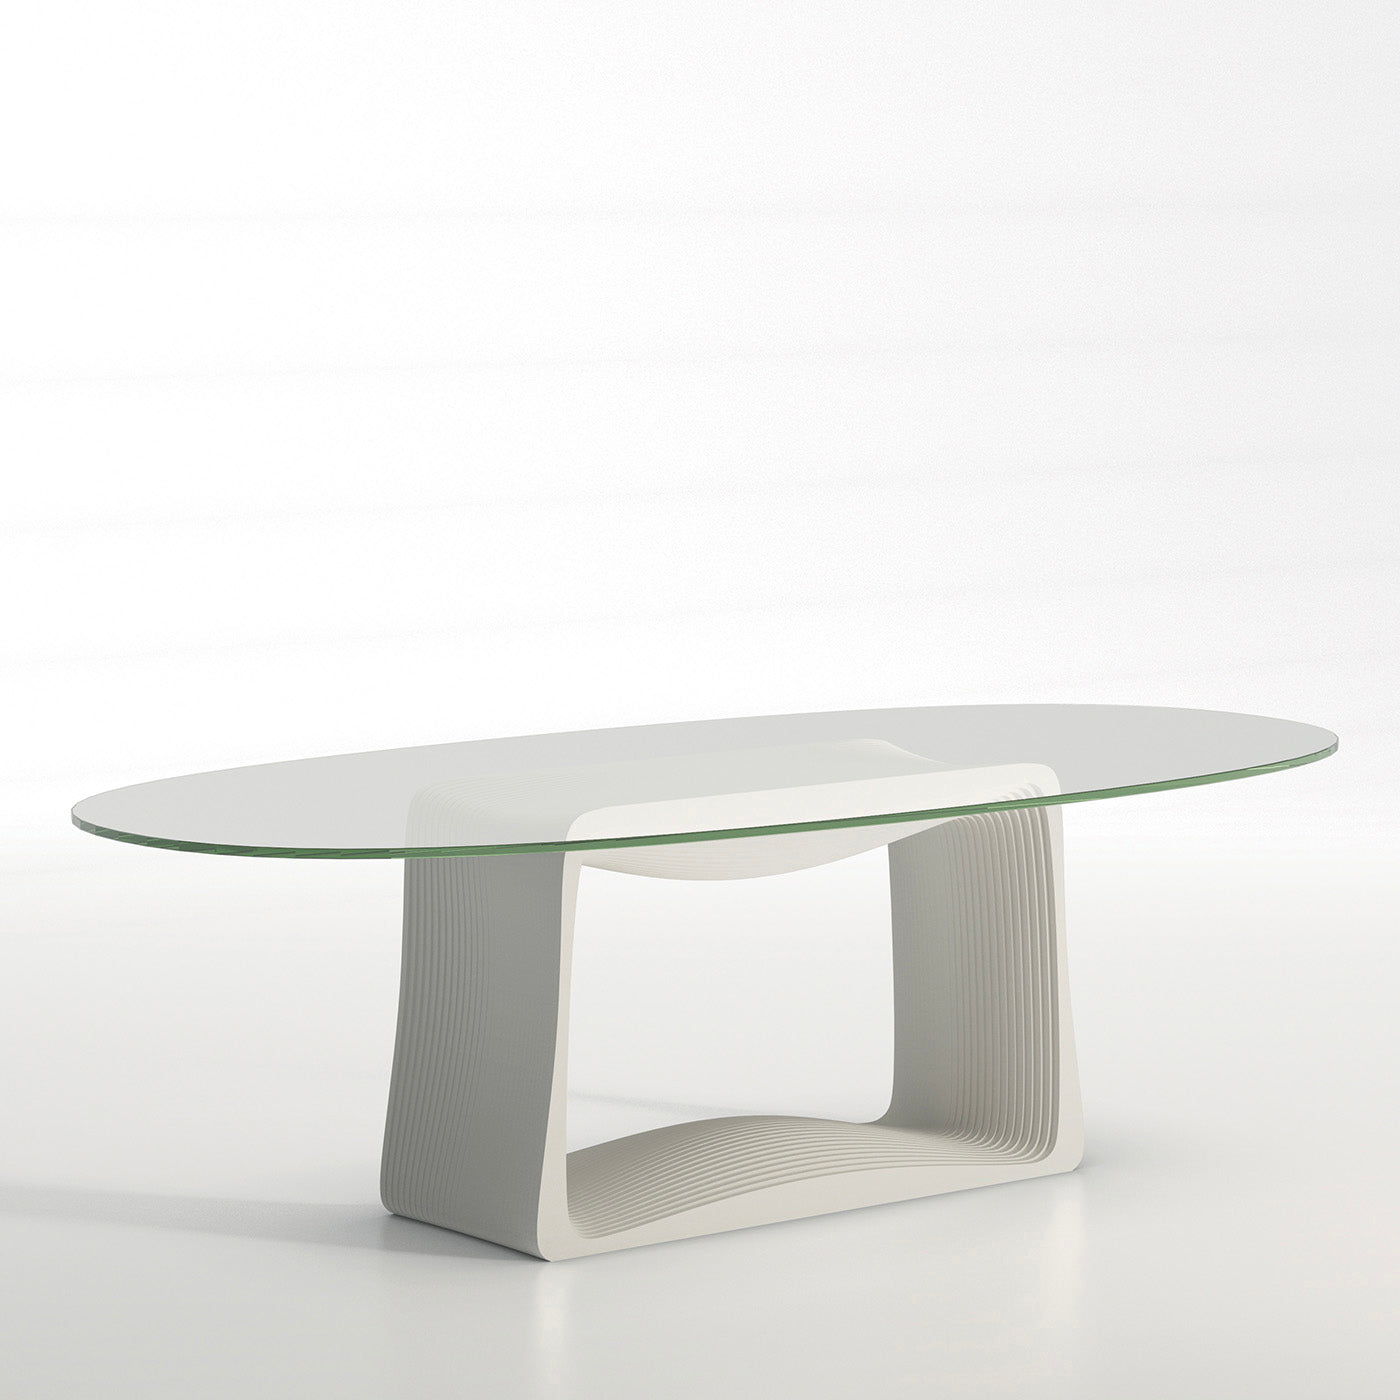 Layer Crystal & White Oval Table by Franco Poli - Alternative view 2